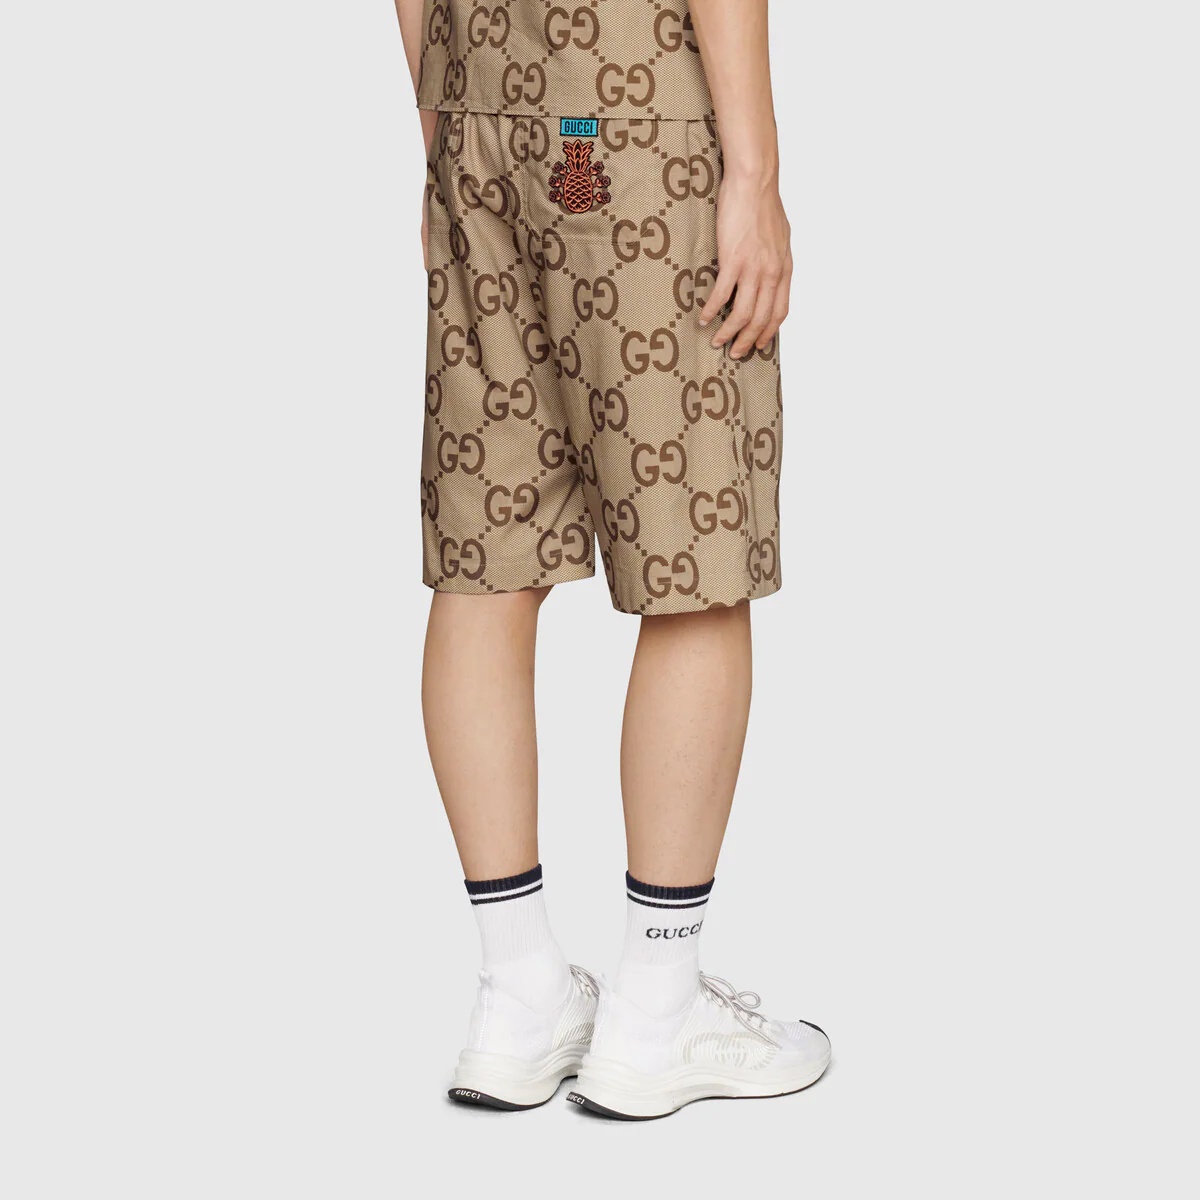 GUCCI Gucci Pineapple GG canvas shorts | REVERSIBLE